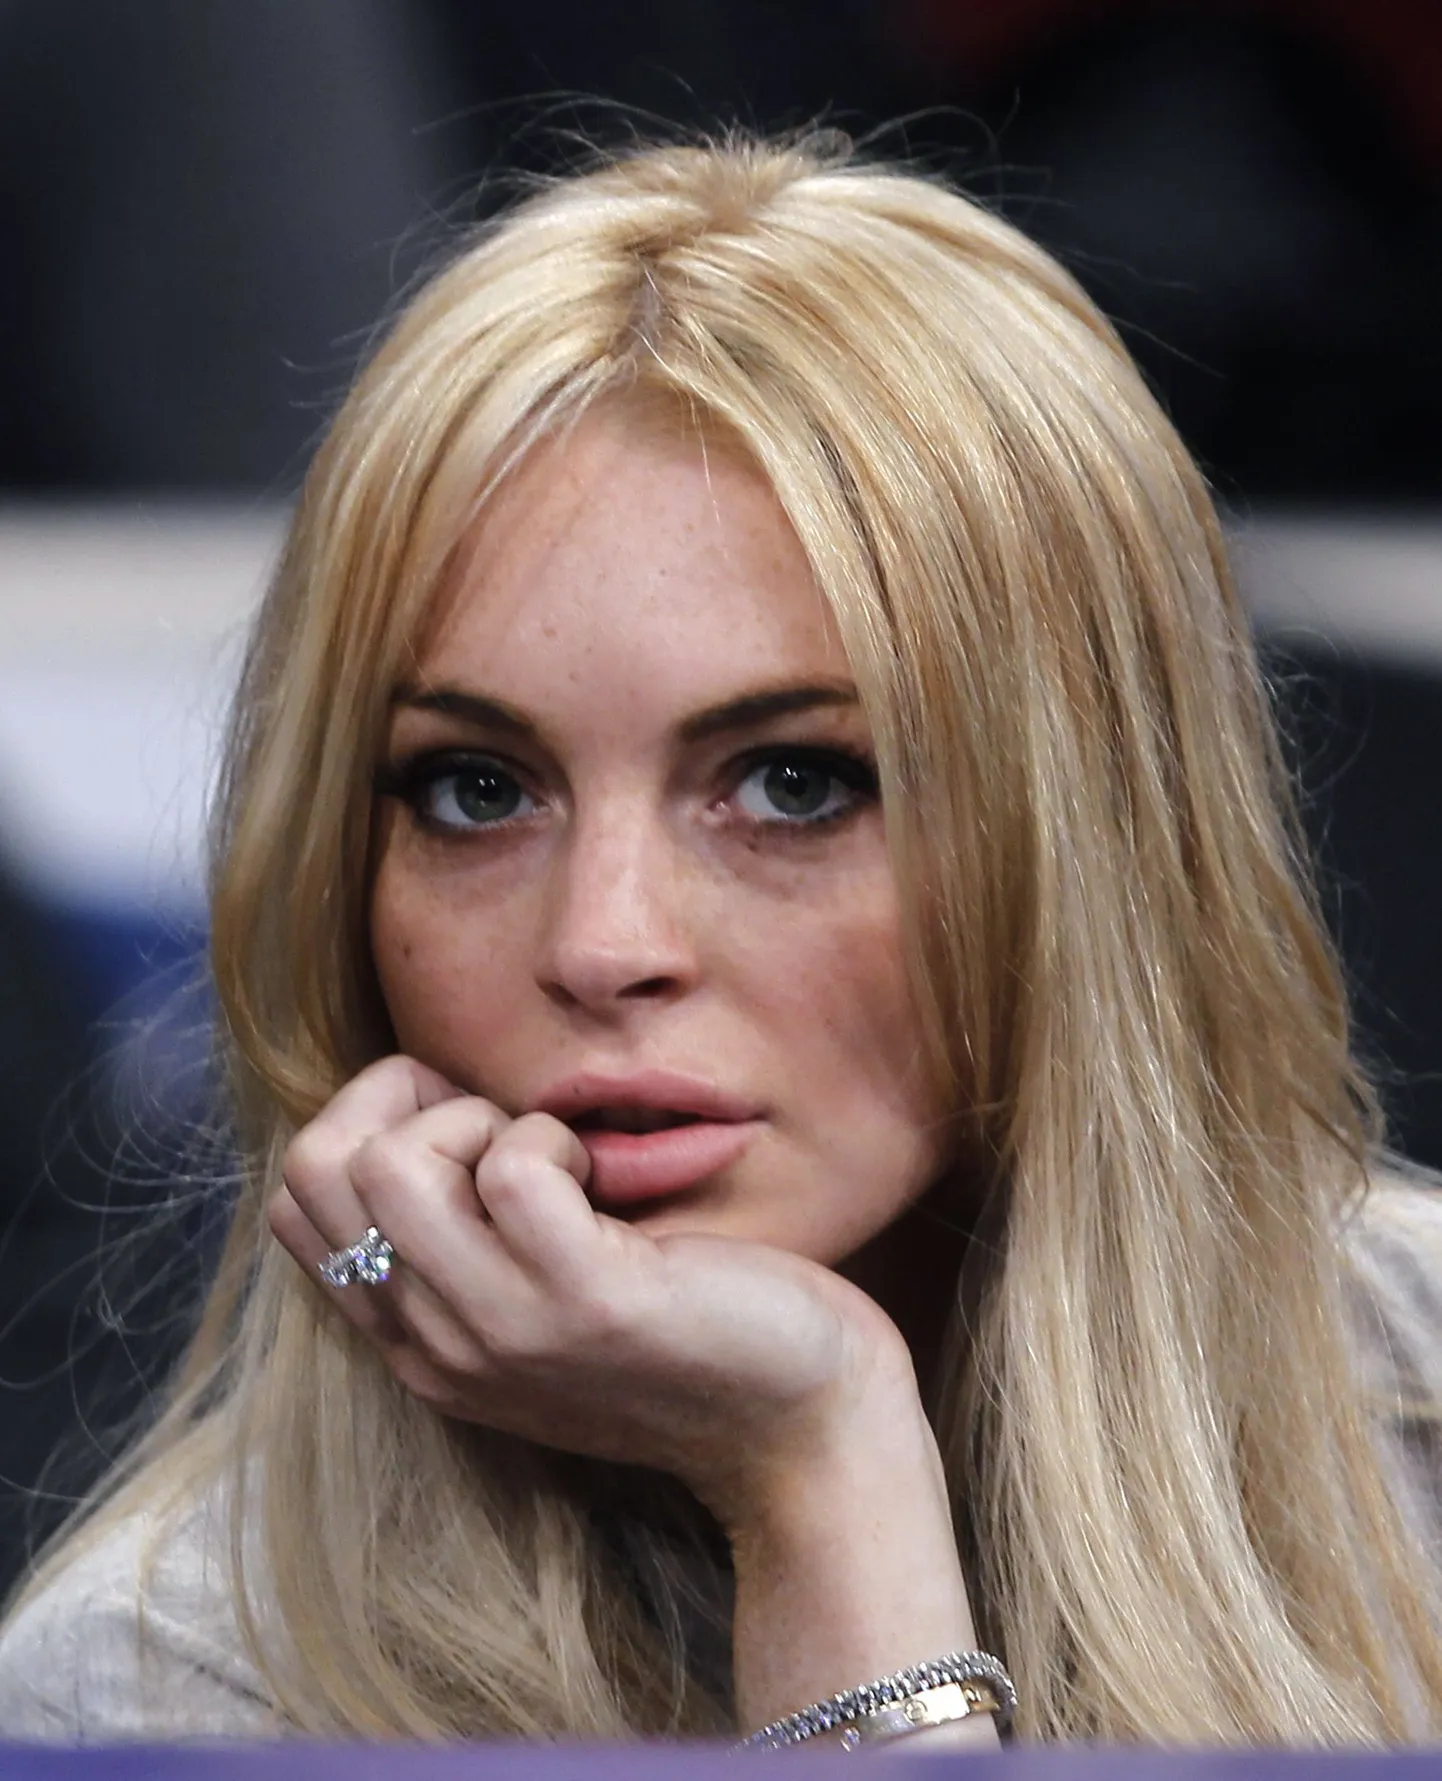 Actress Lindsay Lohan sits courtside before the NBA basketball game between the New York Knicks and the Los Angeles Lakers  in Los Angeles, California, in this January 9, 2011 file photo. Police are investigating Lohan in connection with the theft of a $2,500 necklace from a boutique, but the piece of jewelry has been returned, police said on February 2, 2011. REUTERS/Lucy Nicholson (UNITED STATES - Tags: SPORT CRIME LAW HEADSHOT ENTERTAINMENT)